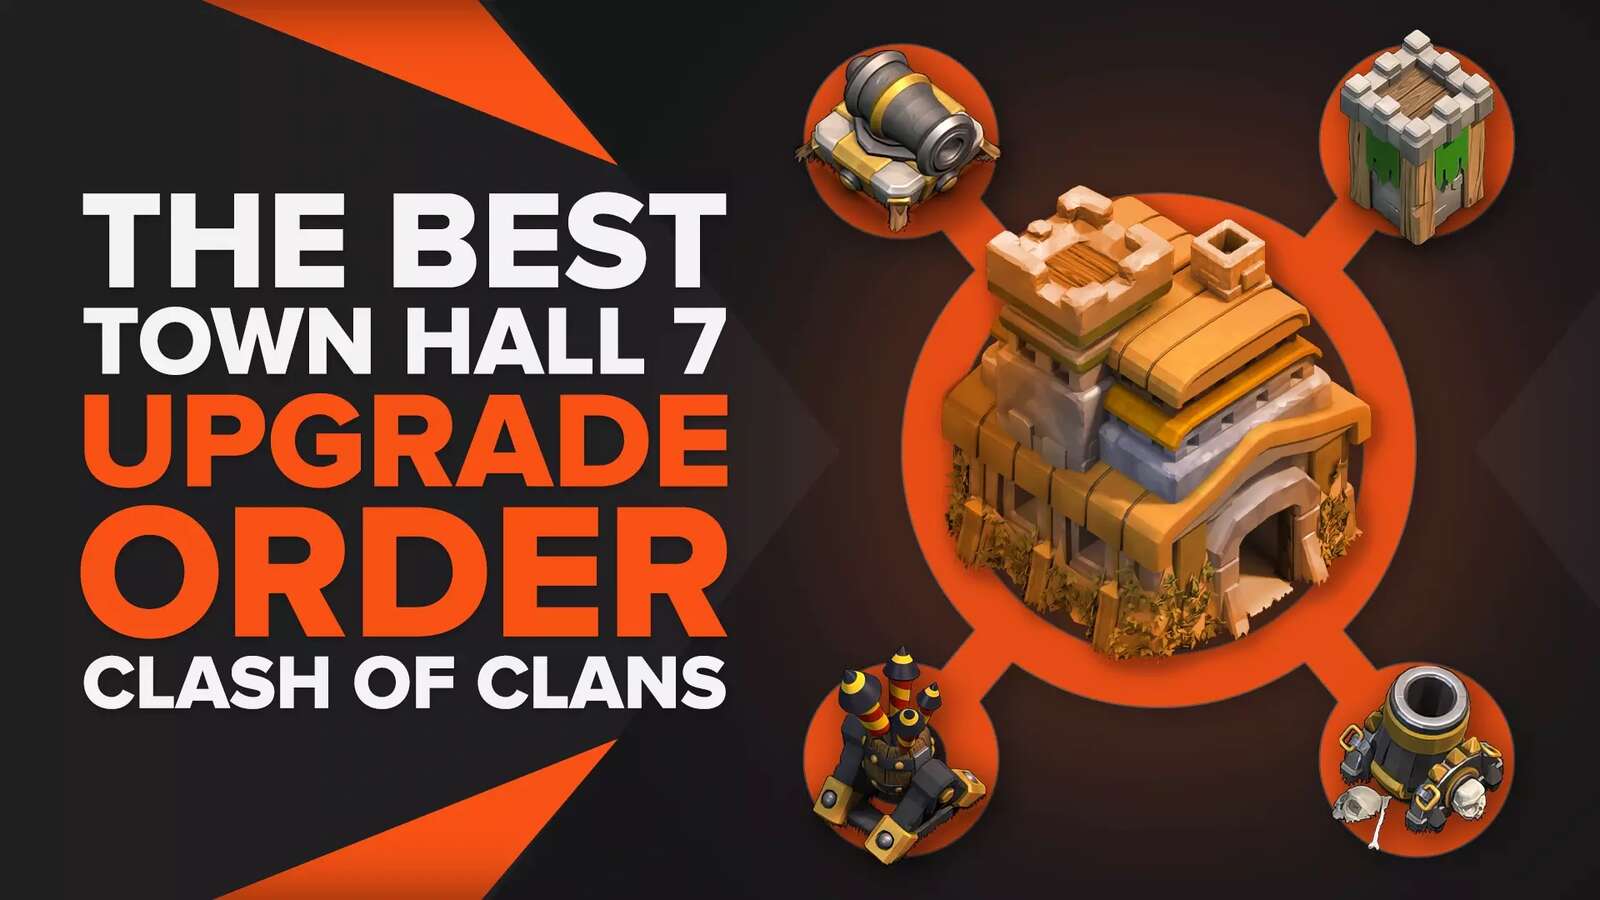 See The Best Town Hall 7 Upgrade Order In Clash Of Clans!